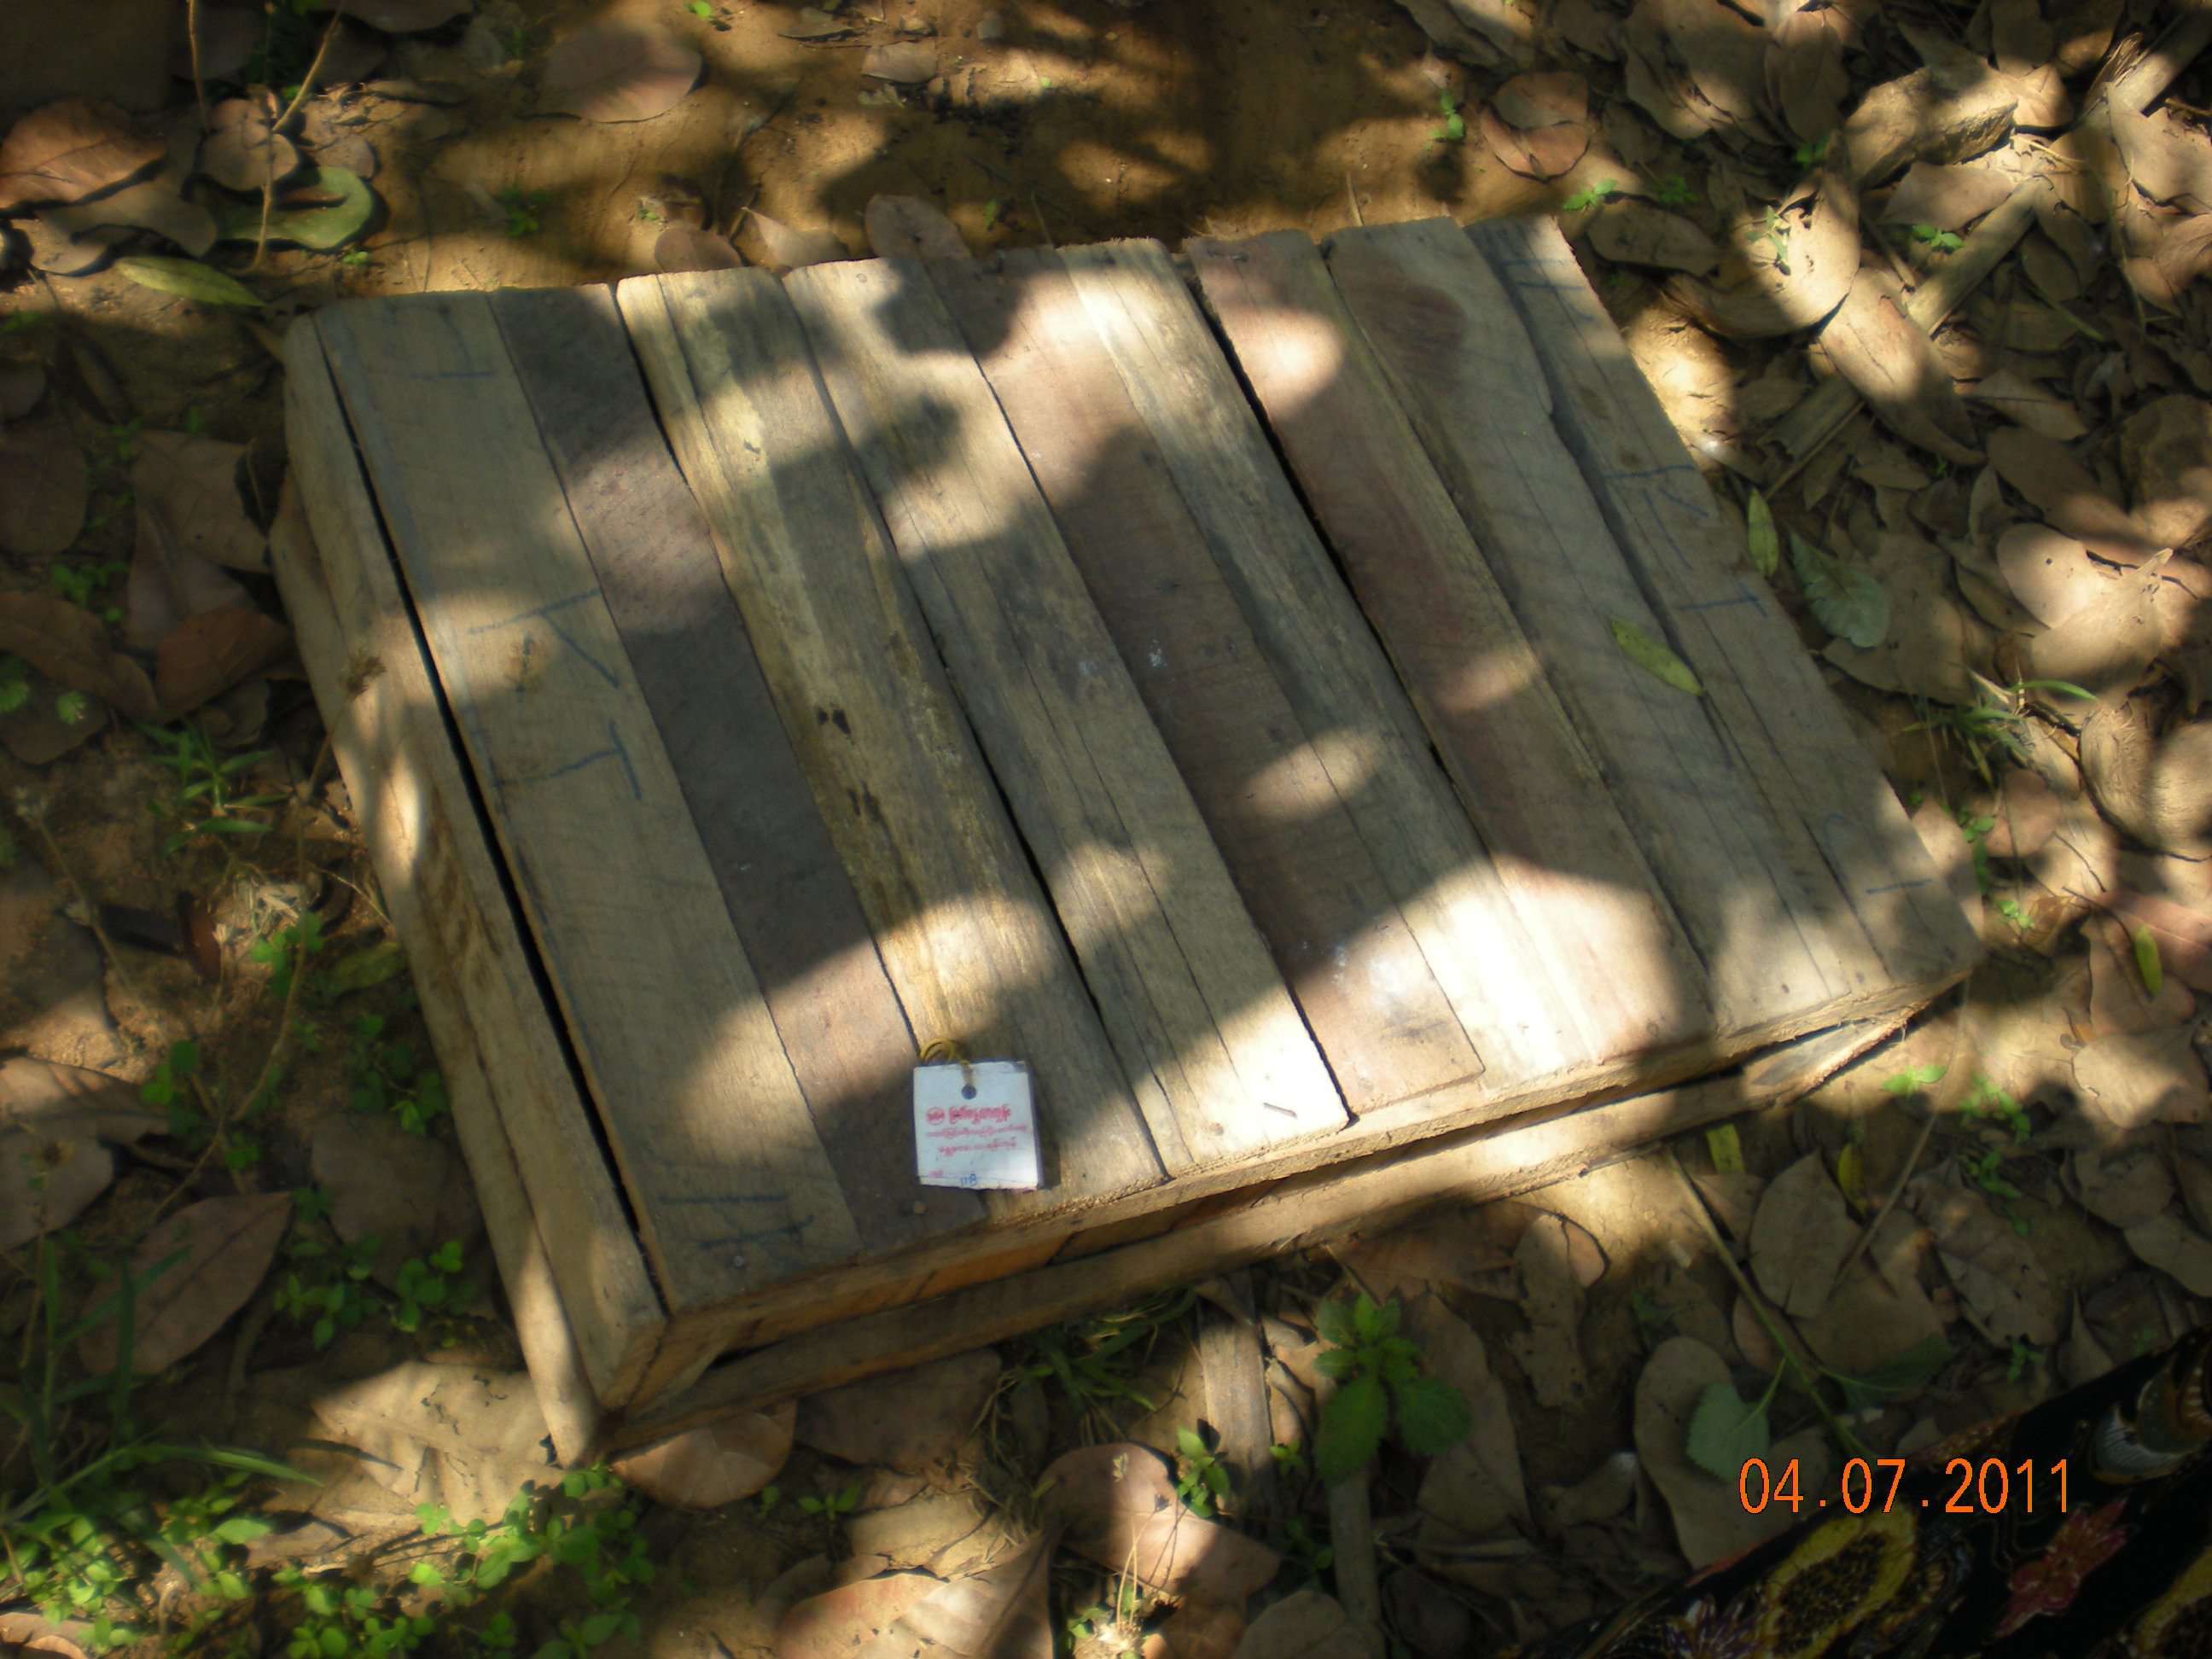 This_wooden_box_was_used_to_transport_the_turtles_to_their_new_facility_safely